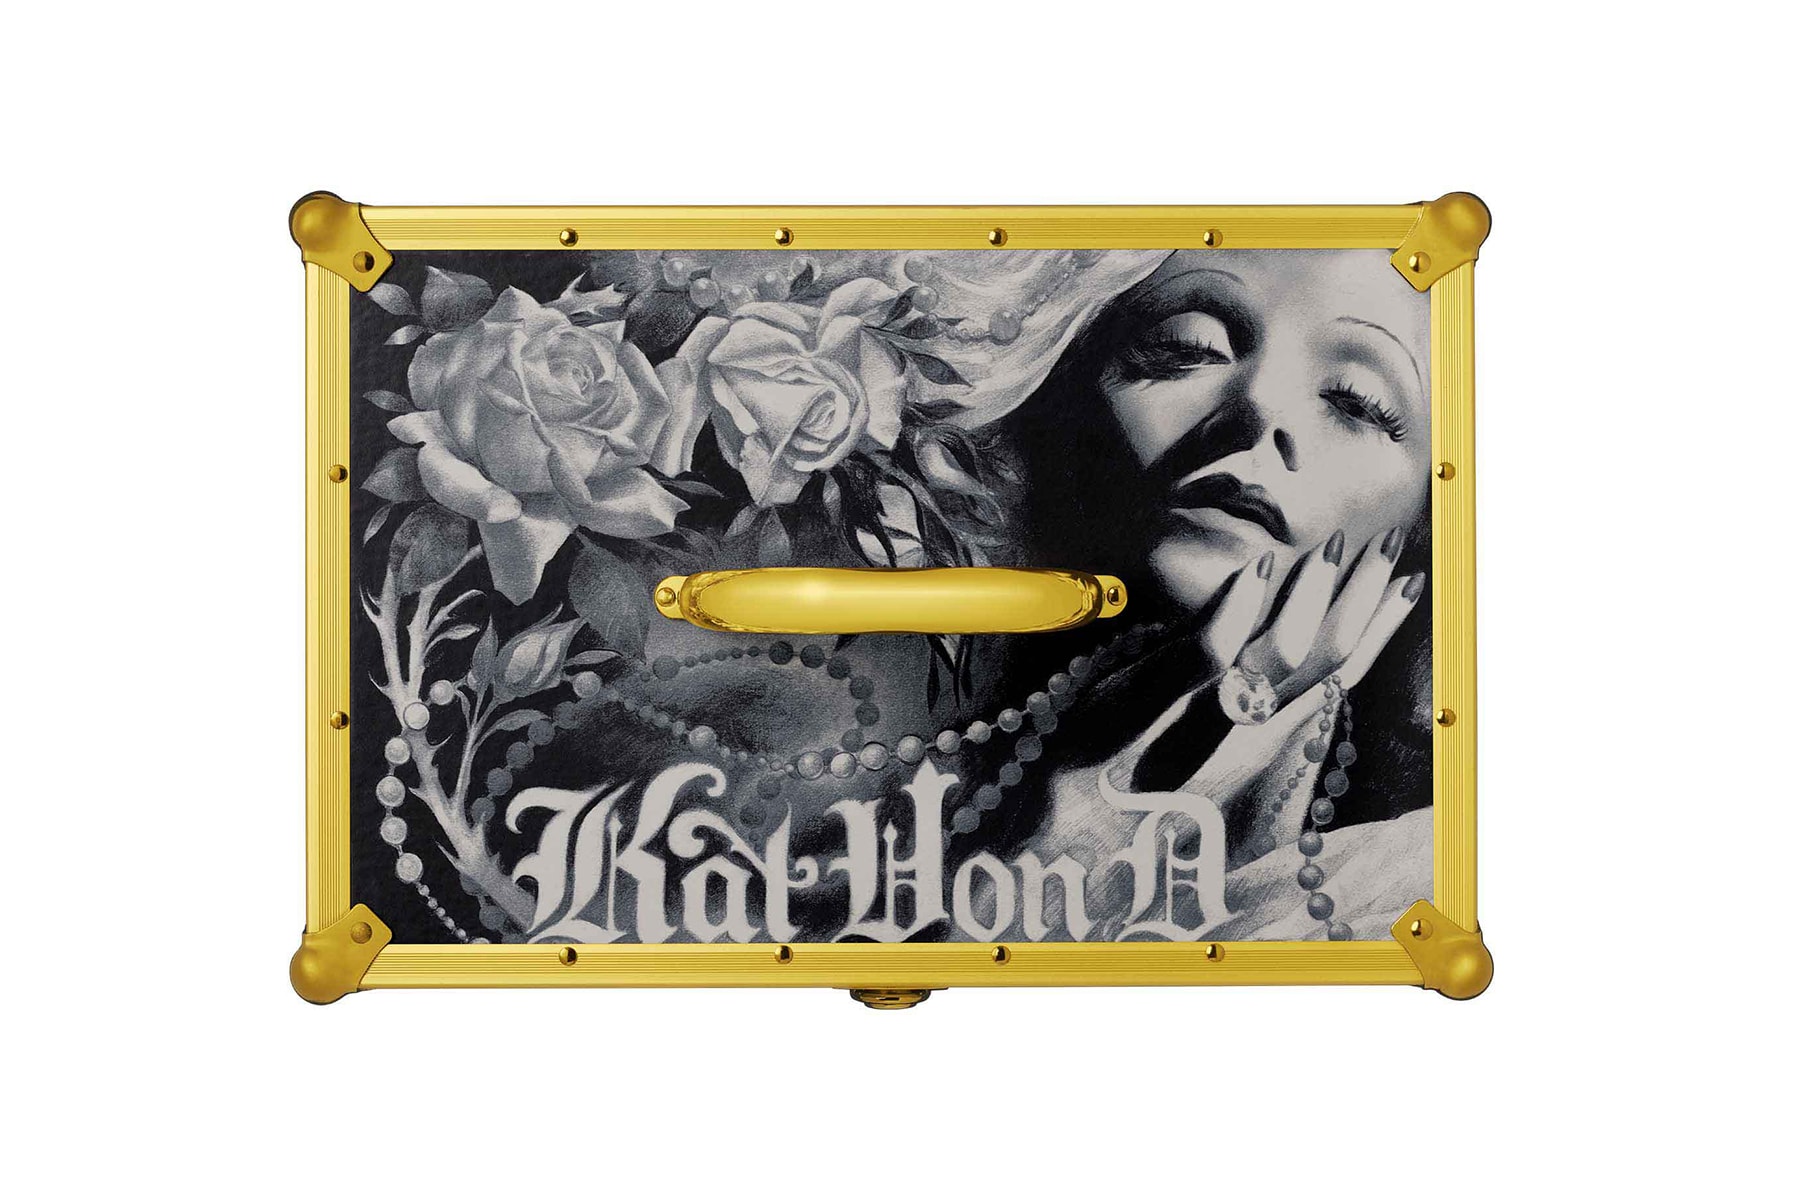 kat von d beauty 10 year anniversary makeup collection gold grey black case trunk drawing portrait tattoo